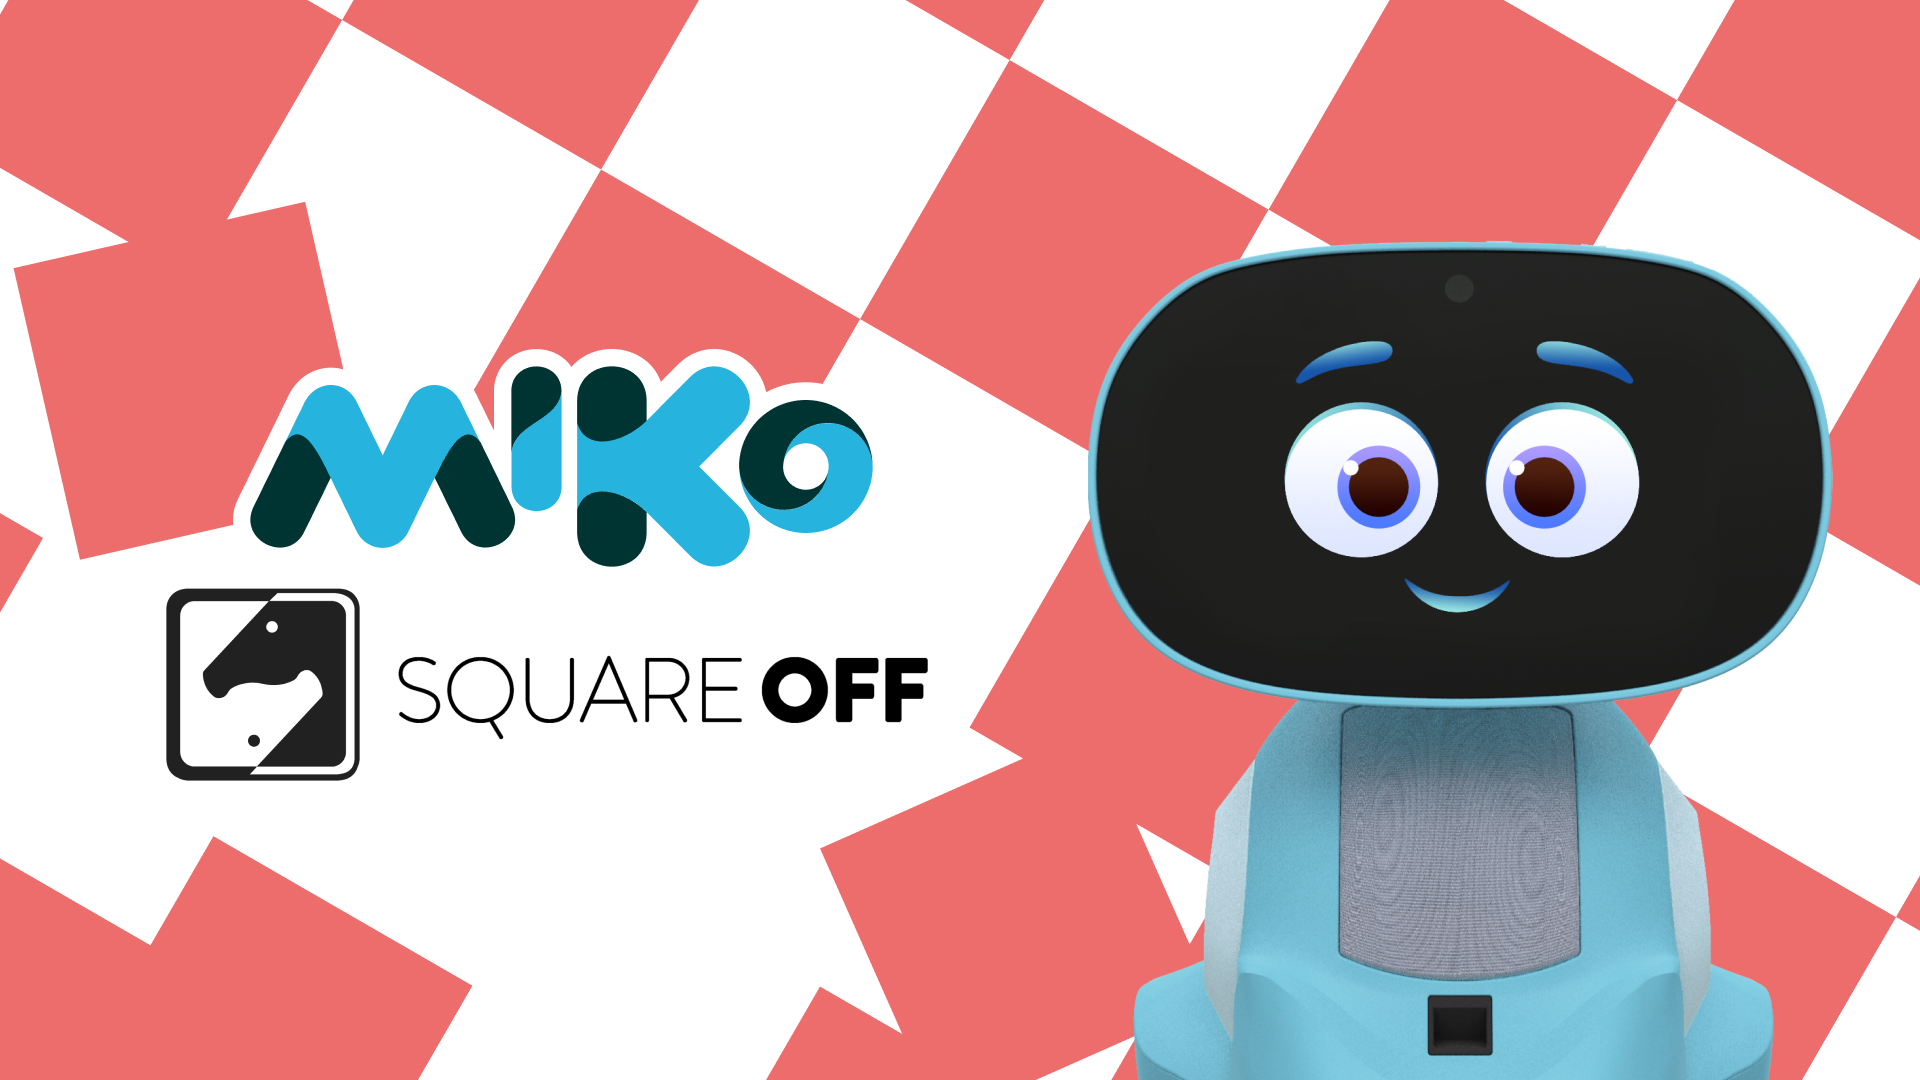 With the acquisition, Miko will expand its product line beyond the AI robot companions that put it on the map.